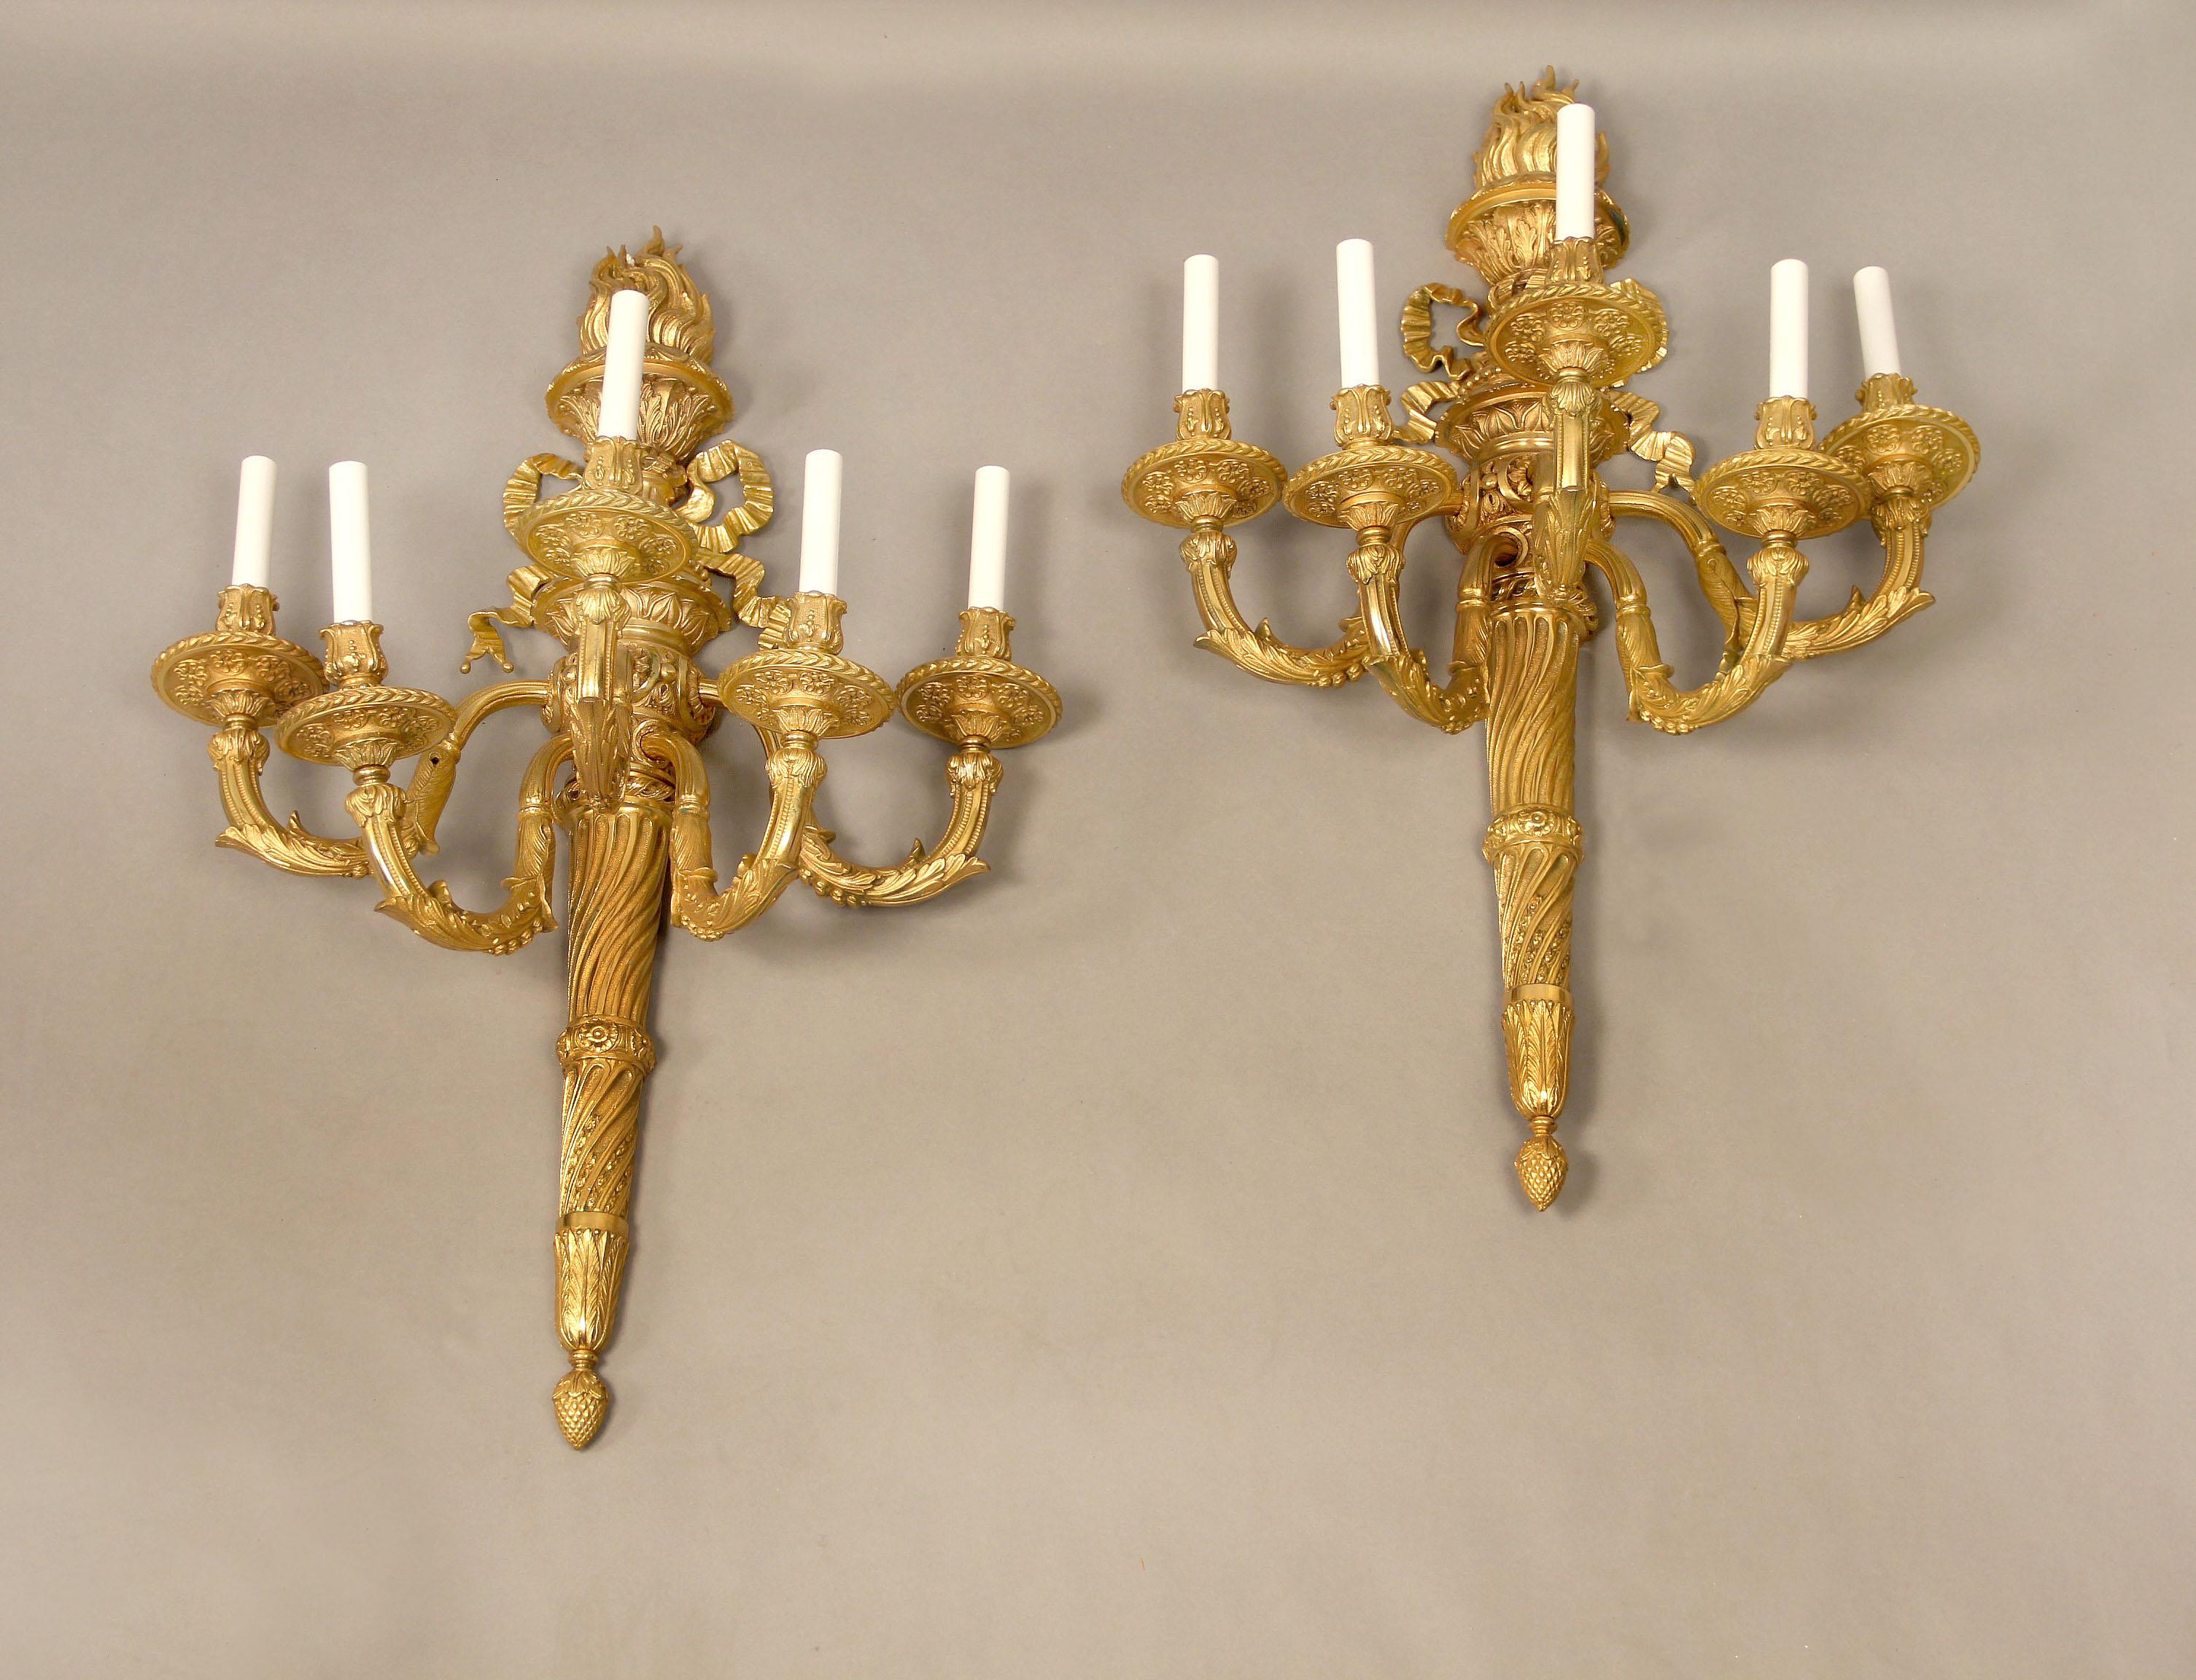 A Very Fine Pair of Early 20th Century Gilt Bronze Five Light Sconces

Each sconce shaped as a spiral torch decorated with bow knotted ribbon and a flame emanating at the top.

 